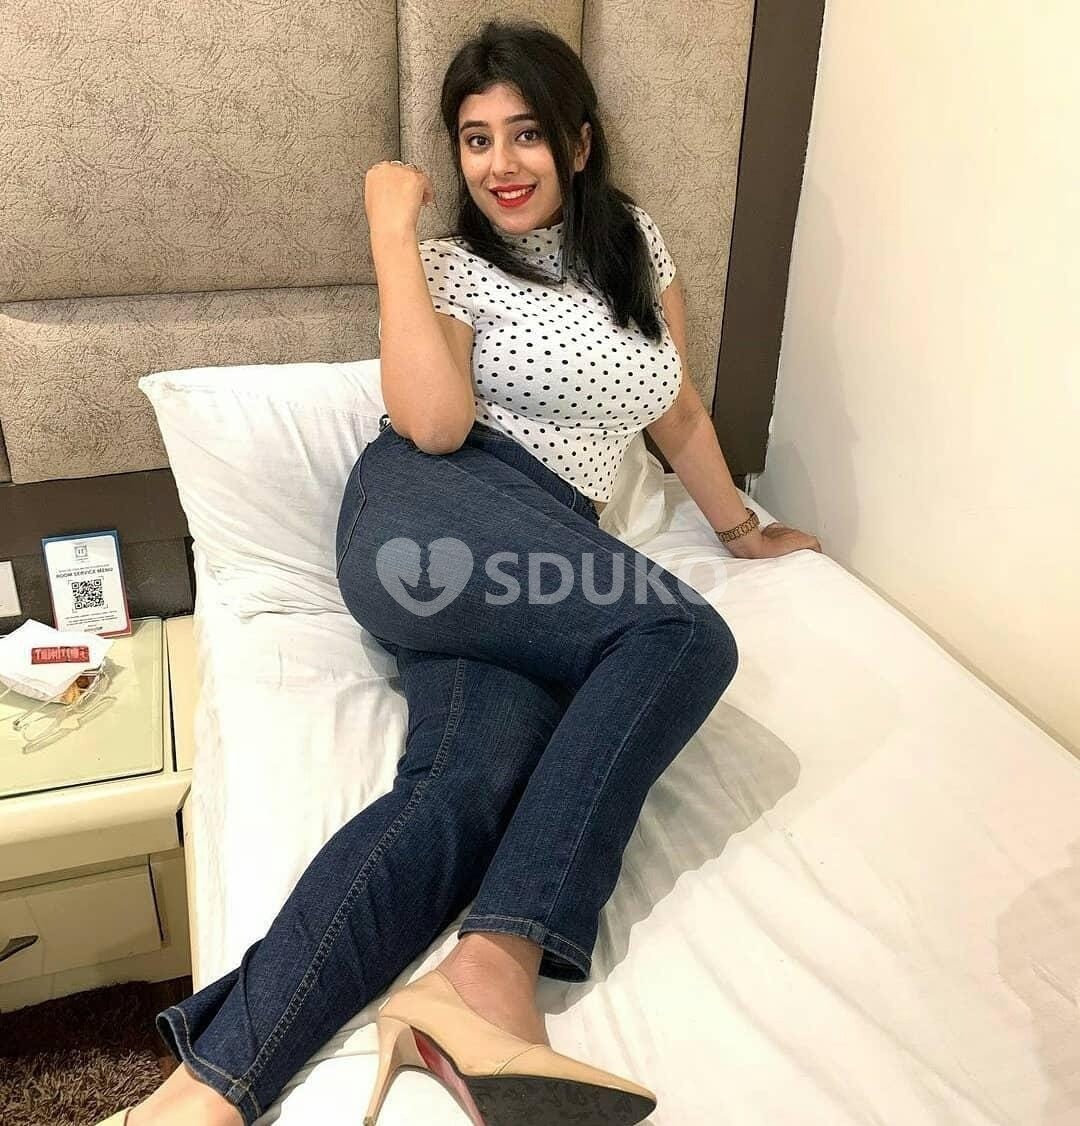 Chandigarh 🆑 24x7 AFFORDABLE CHEAPEST RATE SAFE CALL GIRL SERVICE INCALL& OUTCALL AVAILABLE., About me